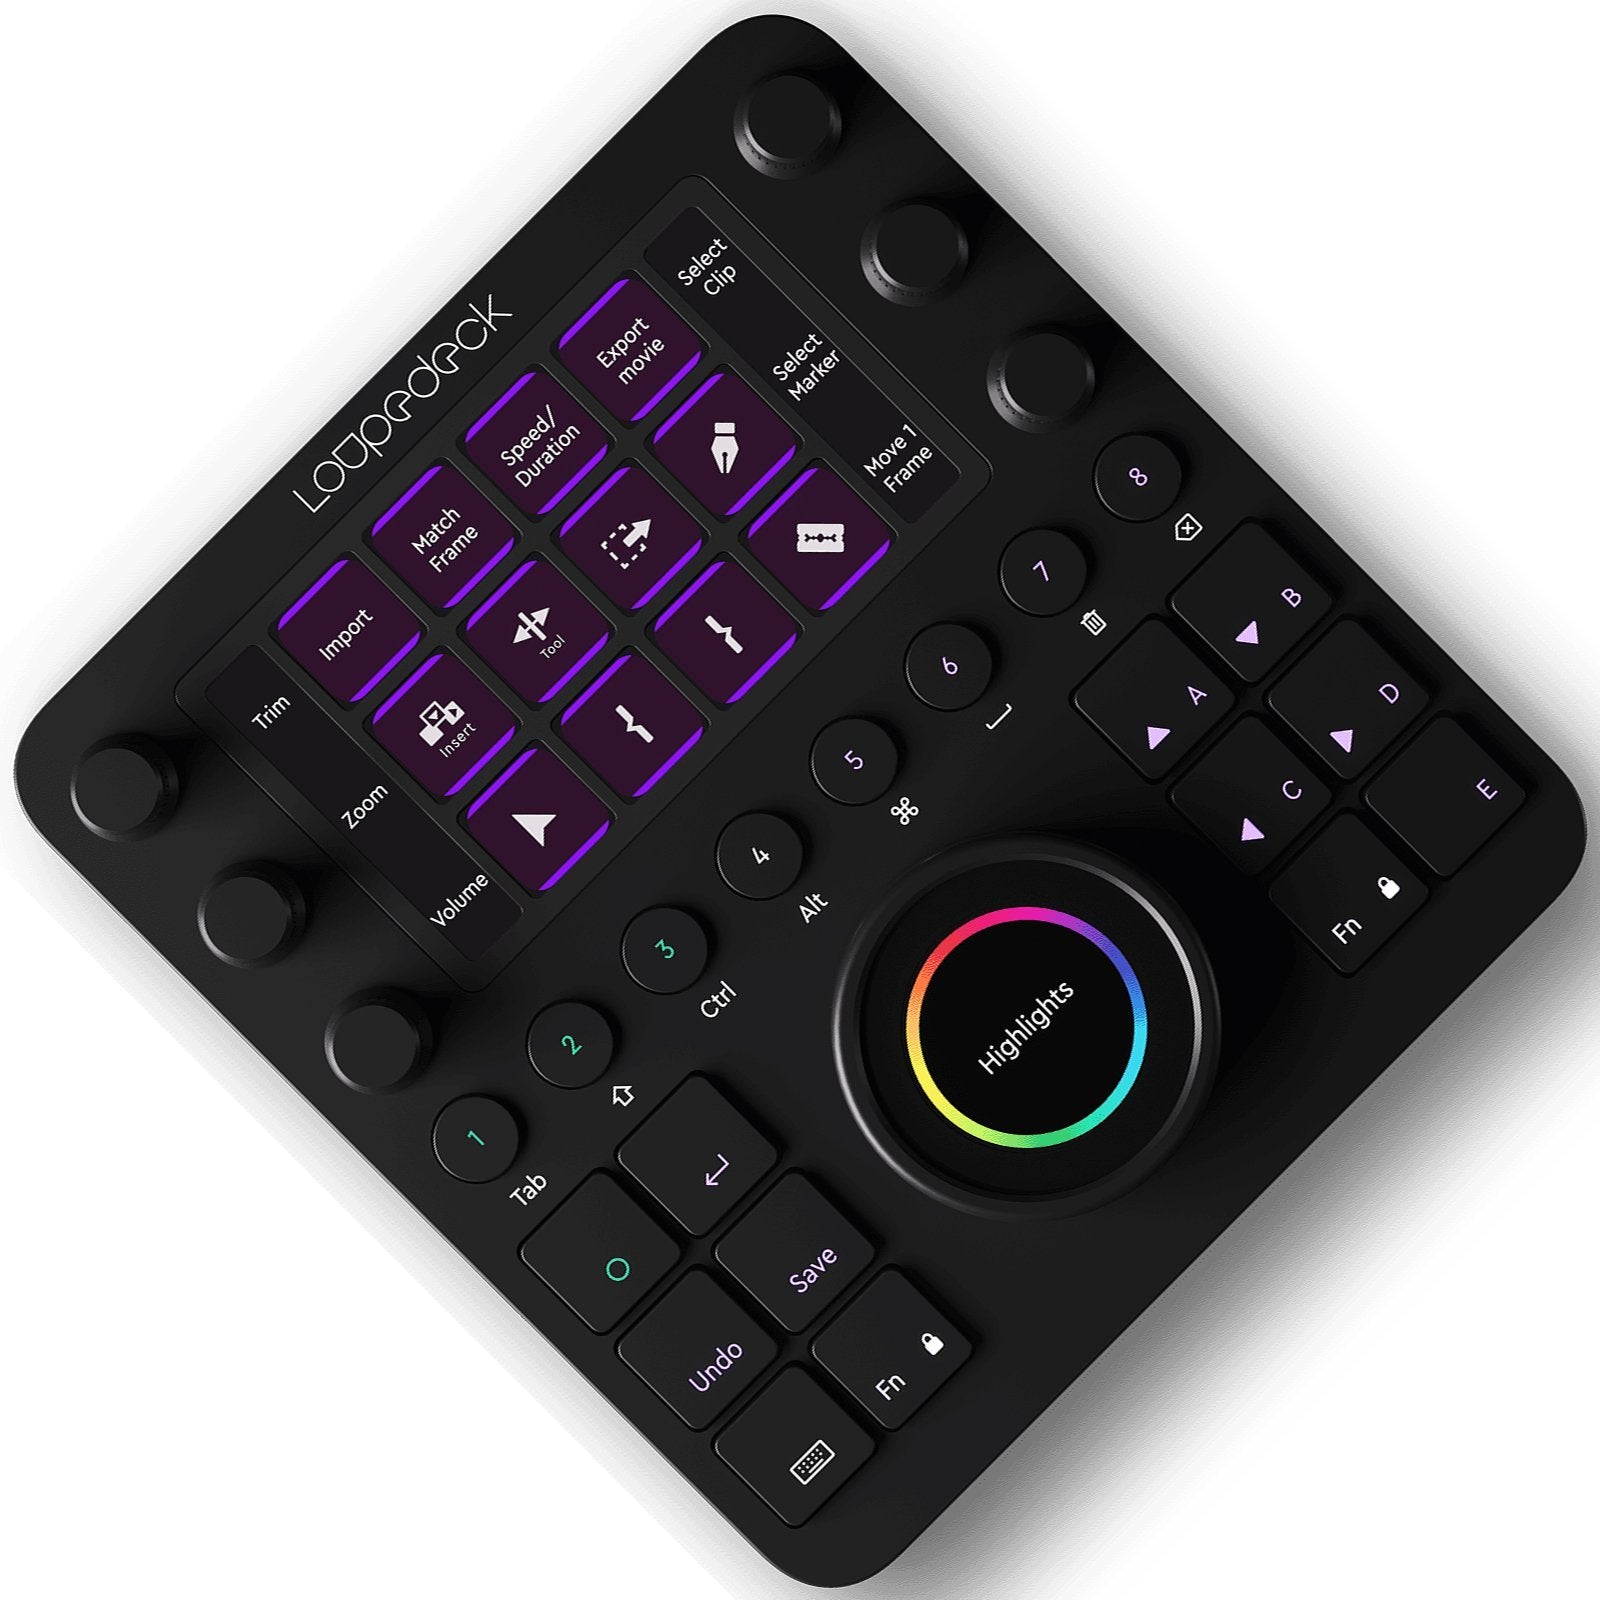 Loupedeck CT Photo and Video Editing Console - Store 974 | ستور ٩٧٤